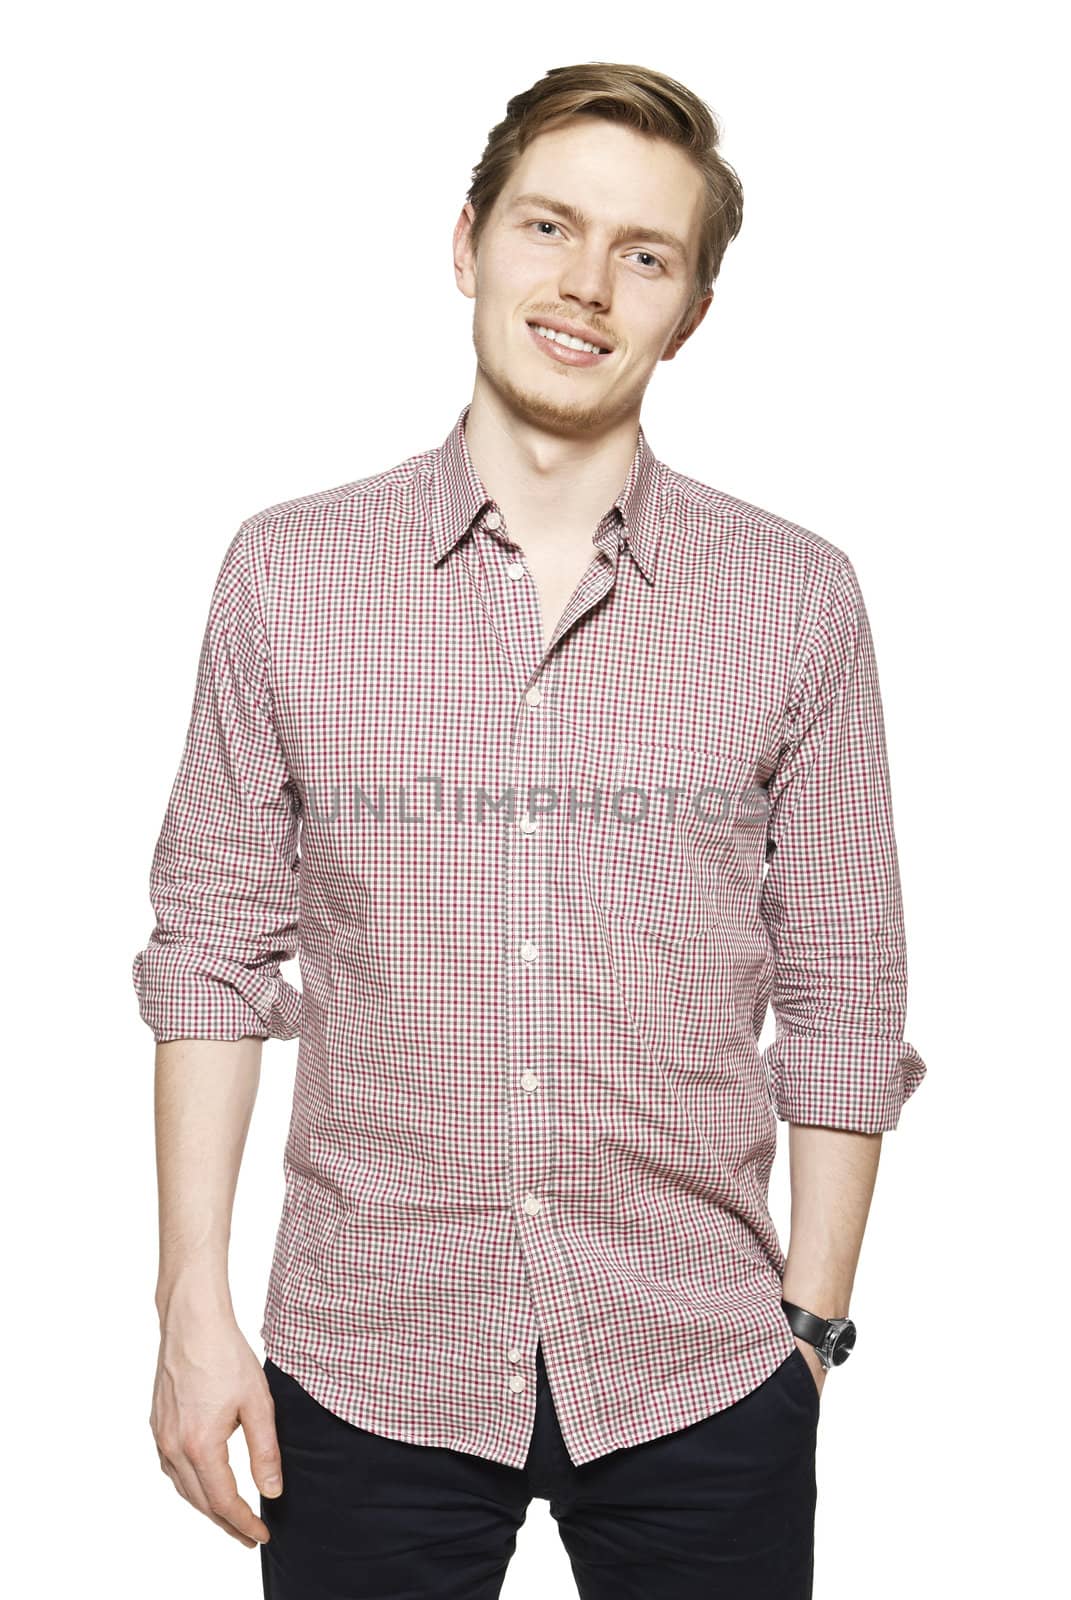 Young man against a white background by filipw